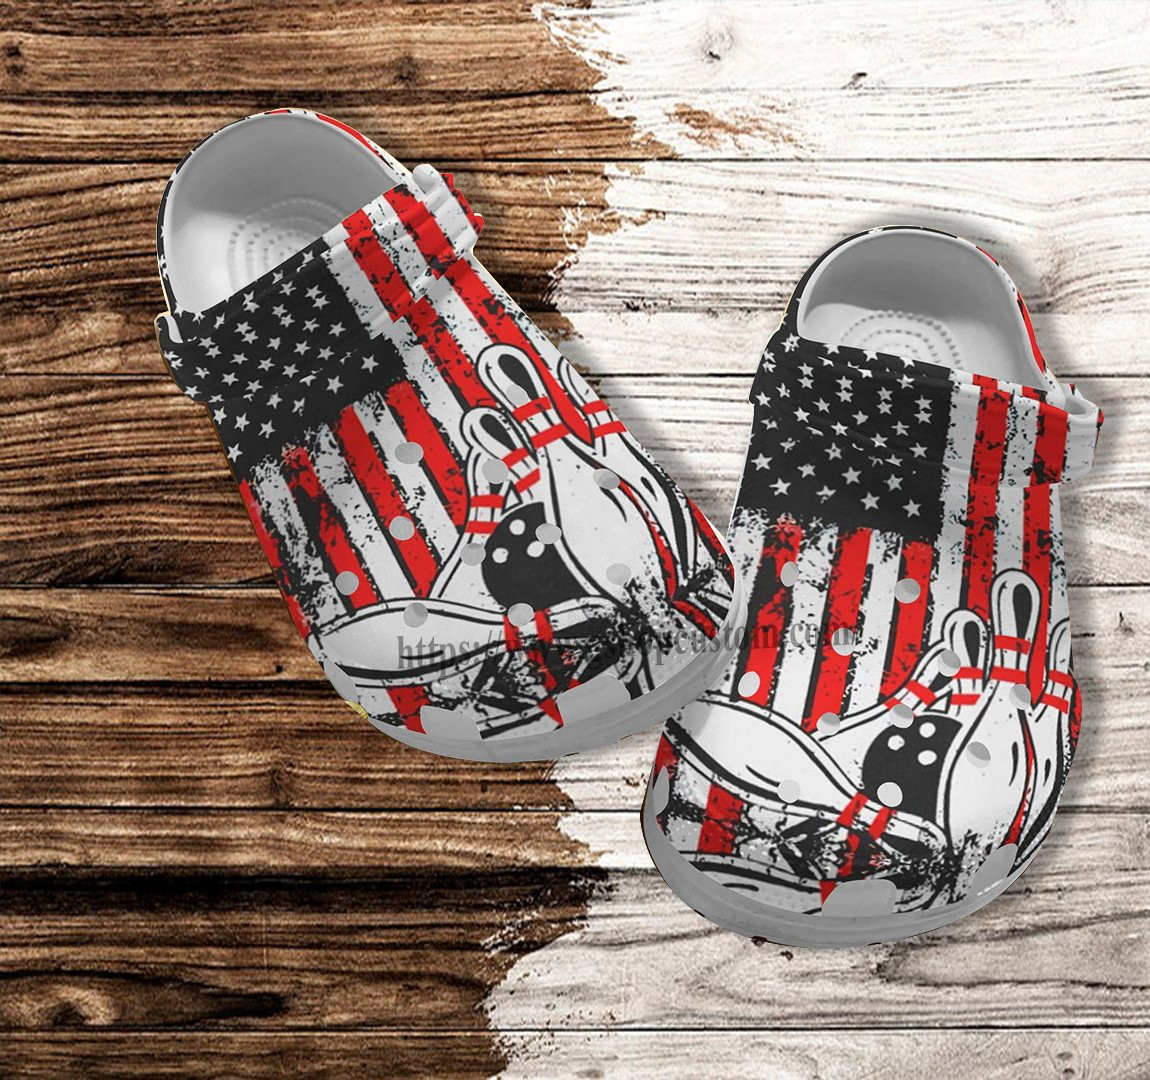 Bowling America Flag Croc Shoes Gift Father Day 2022- Bowling 4Th Of July Shoes Croc Clogs Gift Men Women